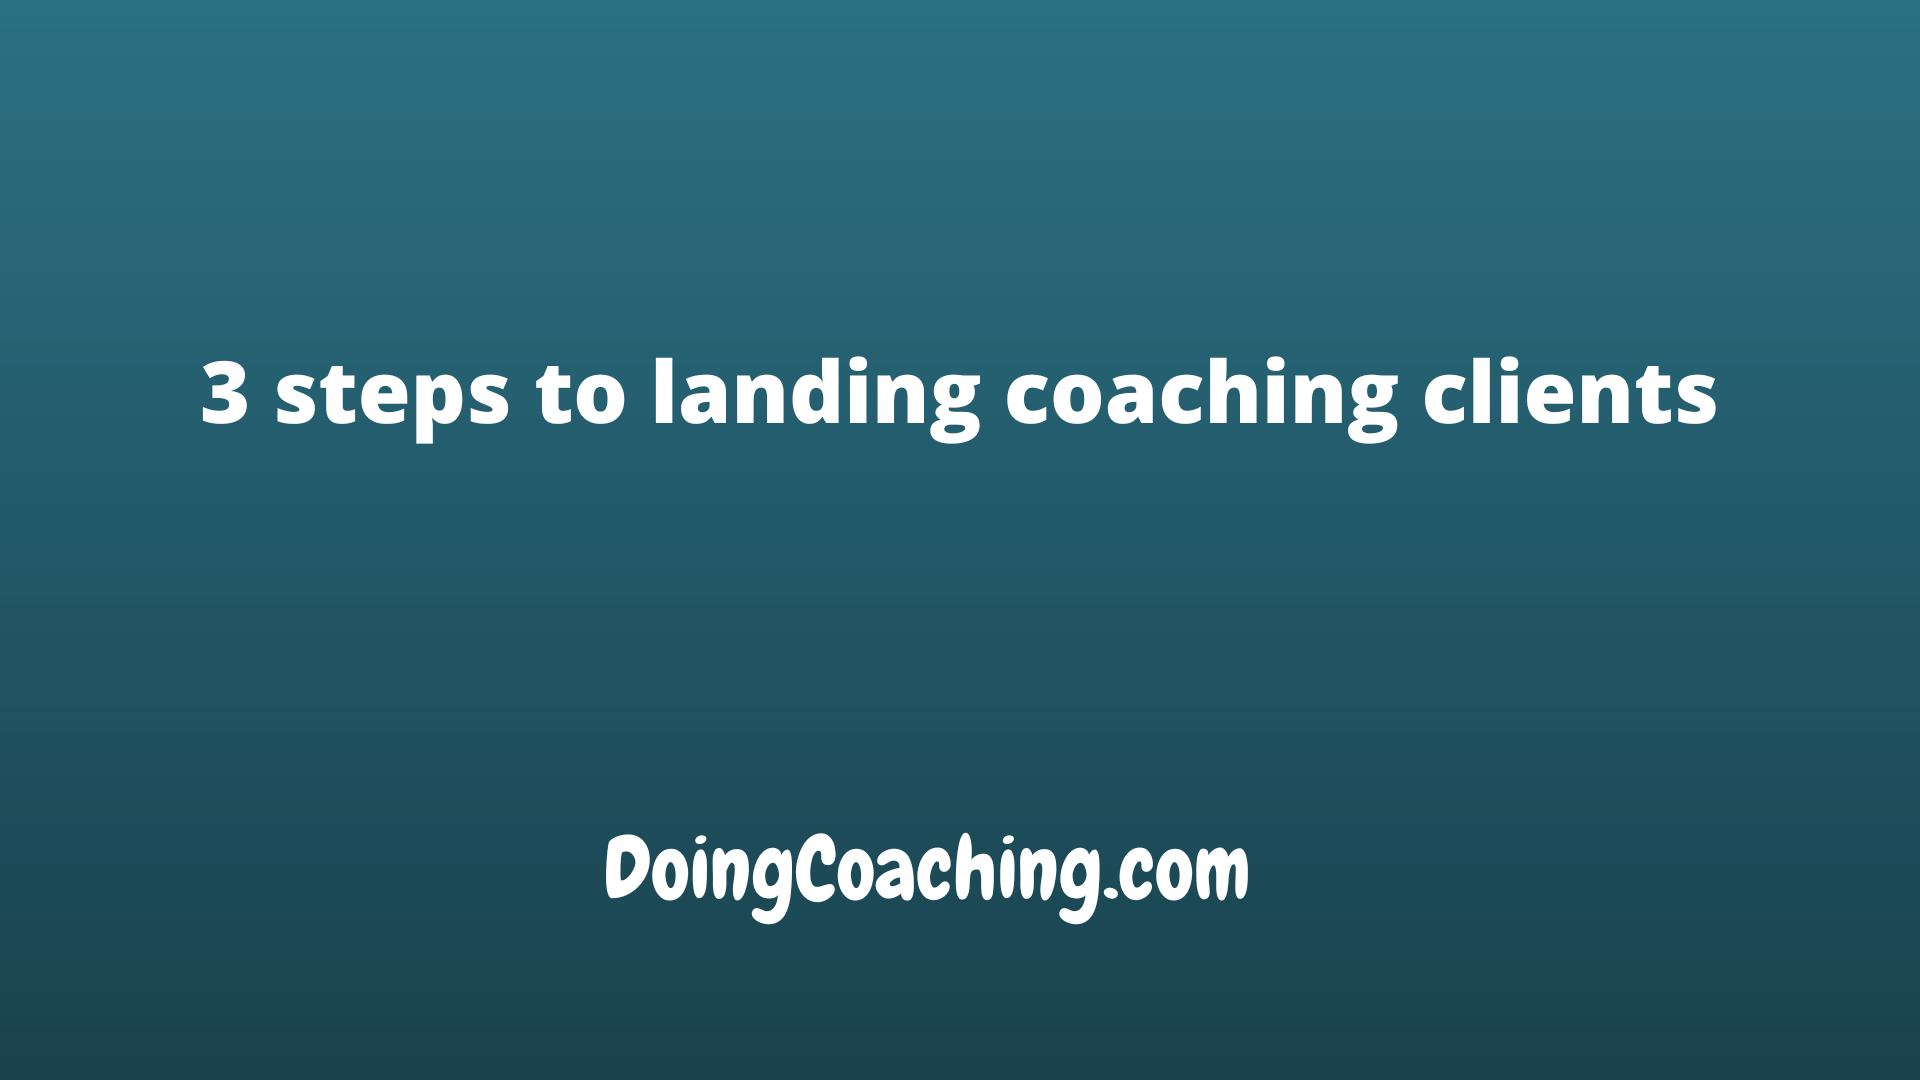 3 steps to landing coaching clients pic